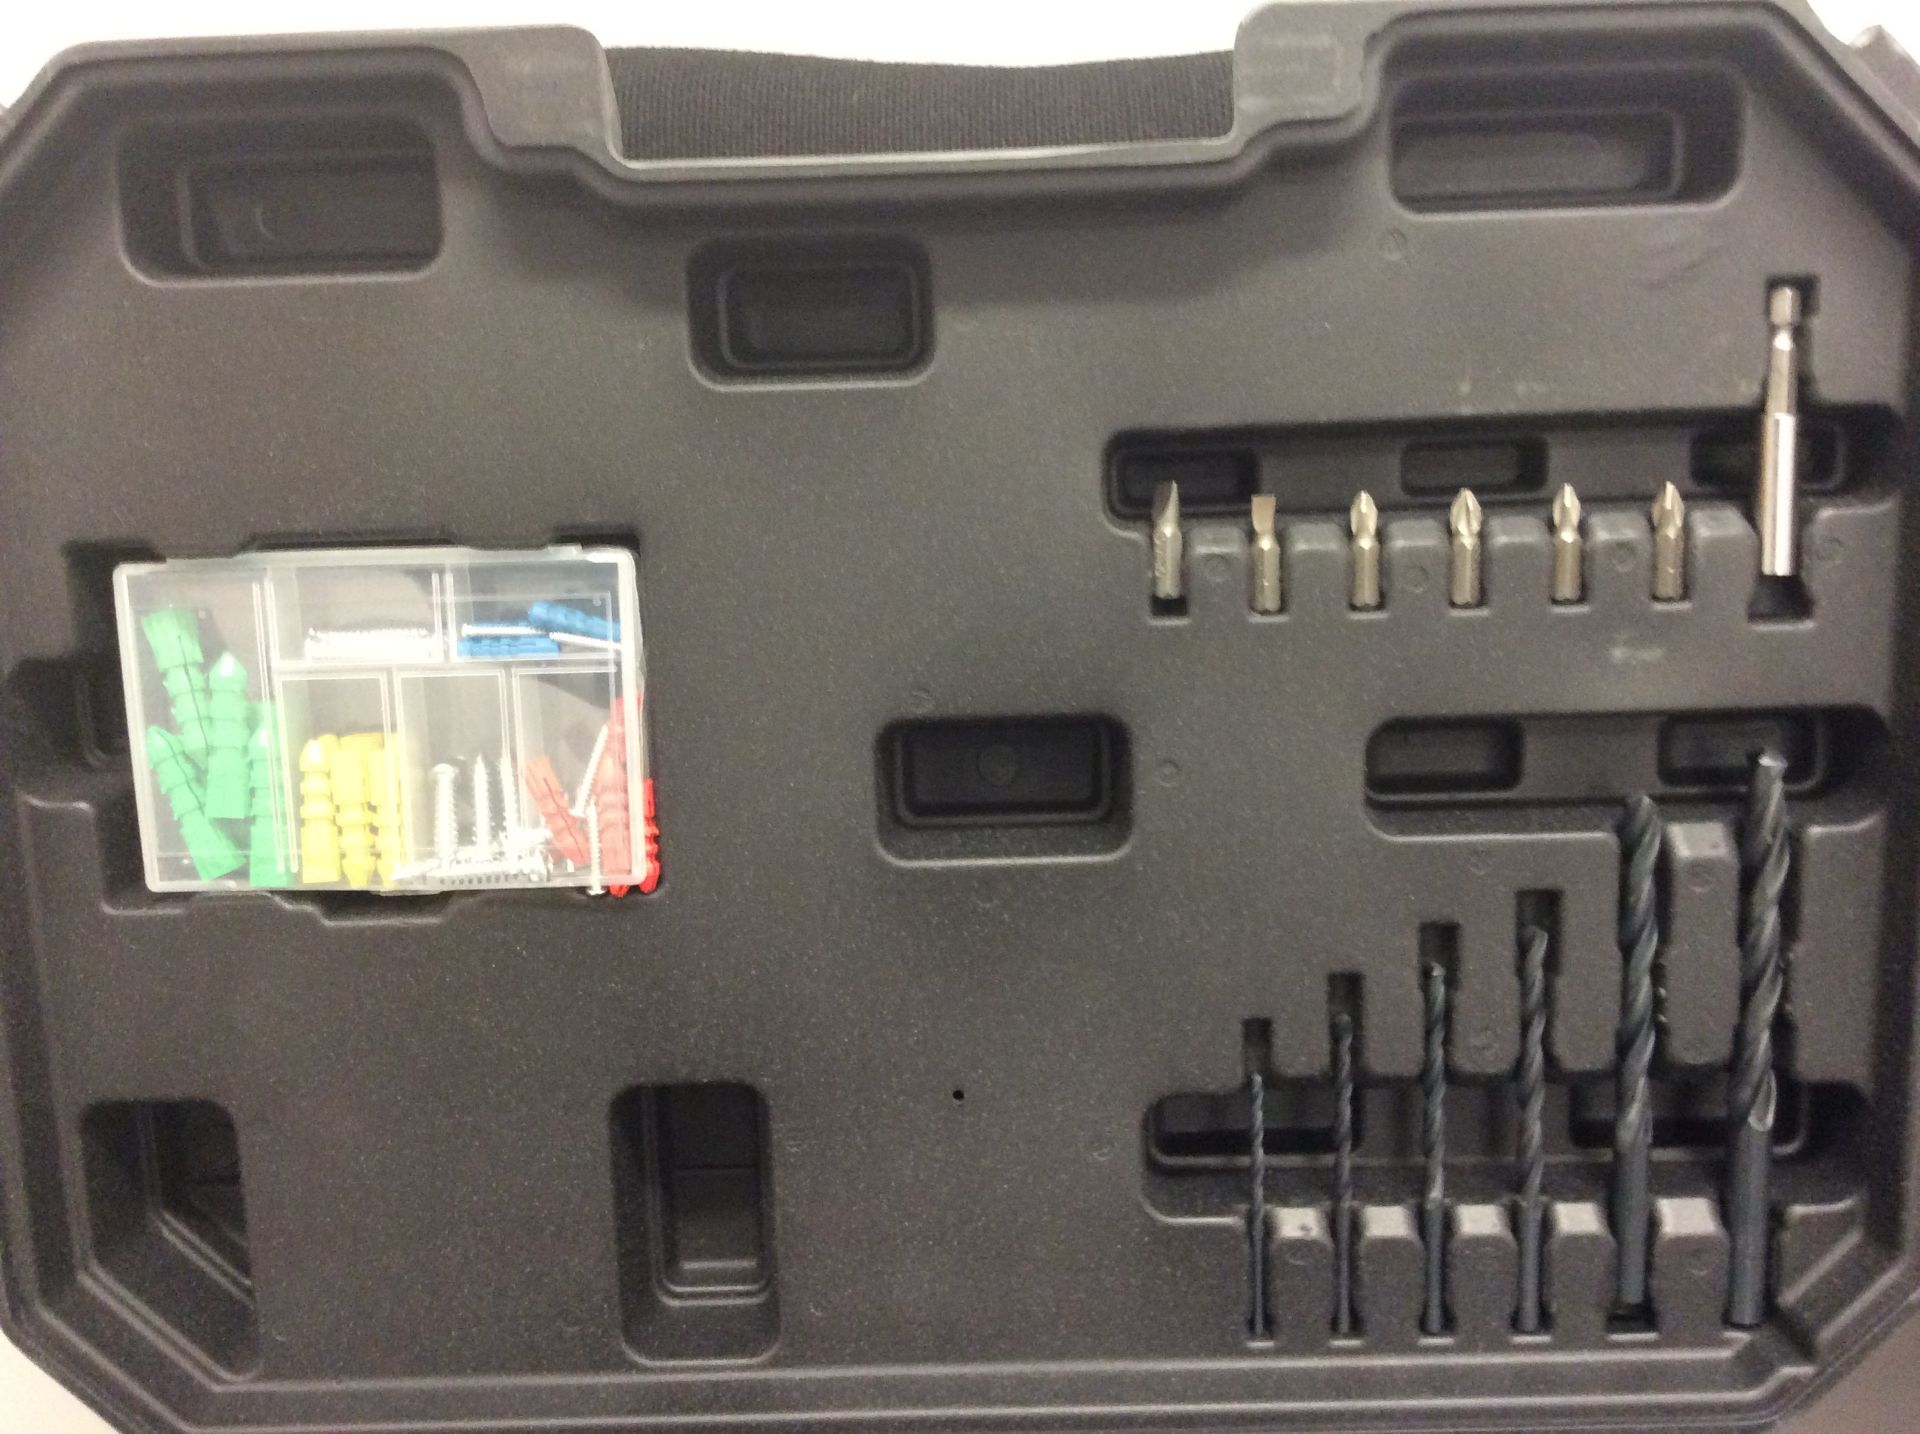 V Brand New Lithium-ion Cordless 24 volt Drill Set In Carry Case With Keyless Chuck - Impact Setting - Image 3 of 3